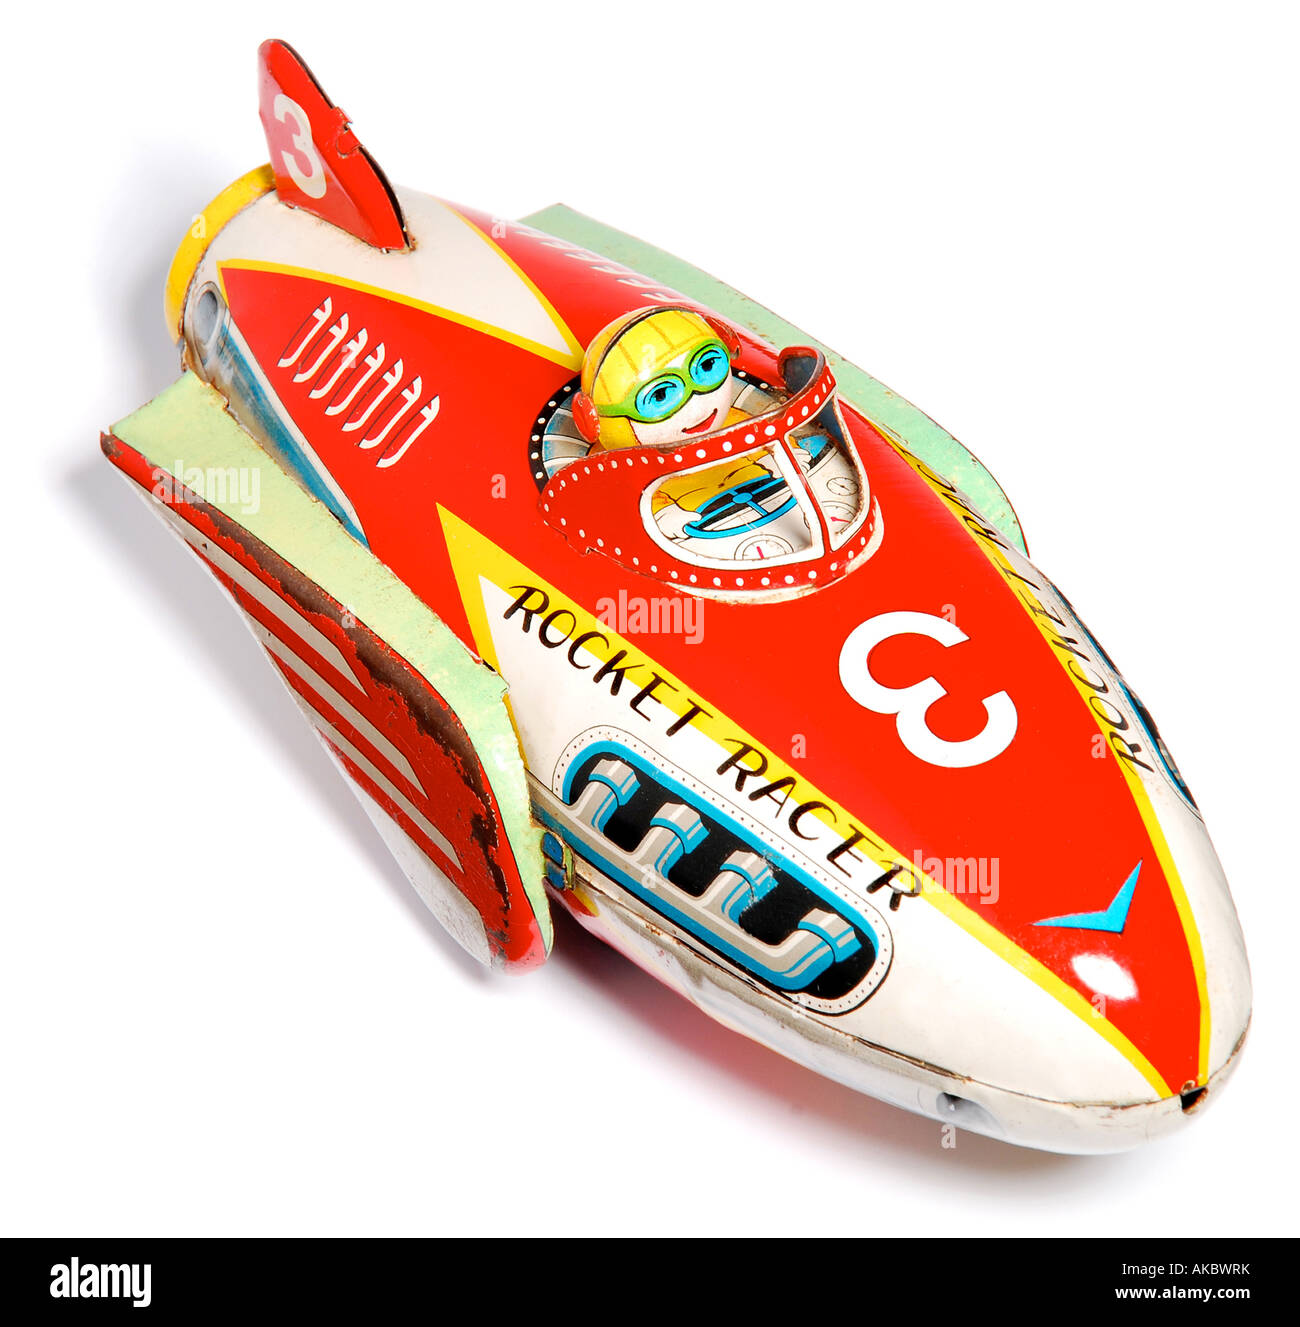 Colourful Retro toy rocket / spaceship. Picture by Patrick Steel patricksteel Stock Photo